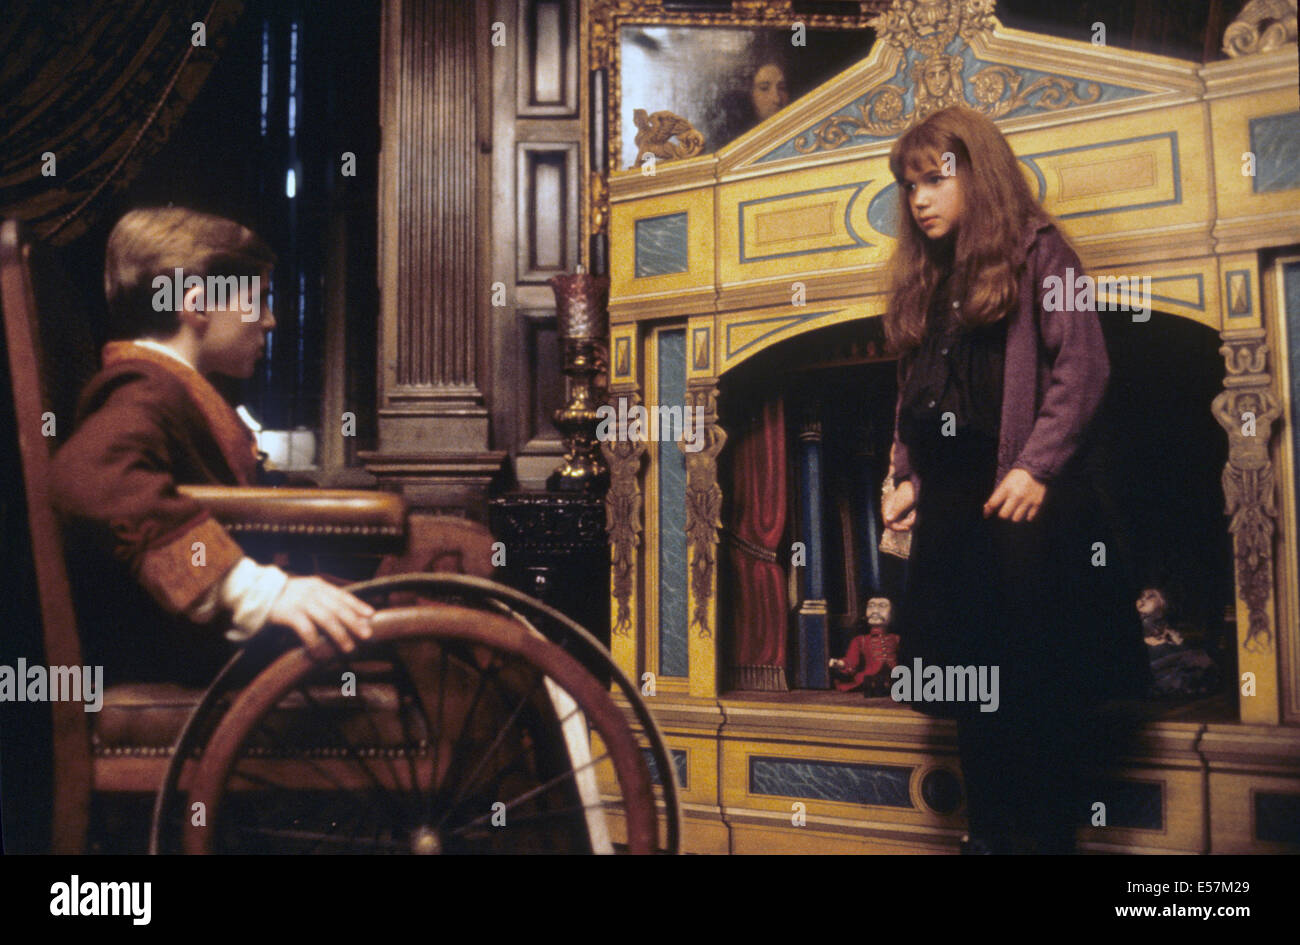 THE SECRET GARDEN 1993 Warner Bros film with Heydon Prowse and Kate Maberly Stock Photo